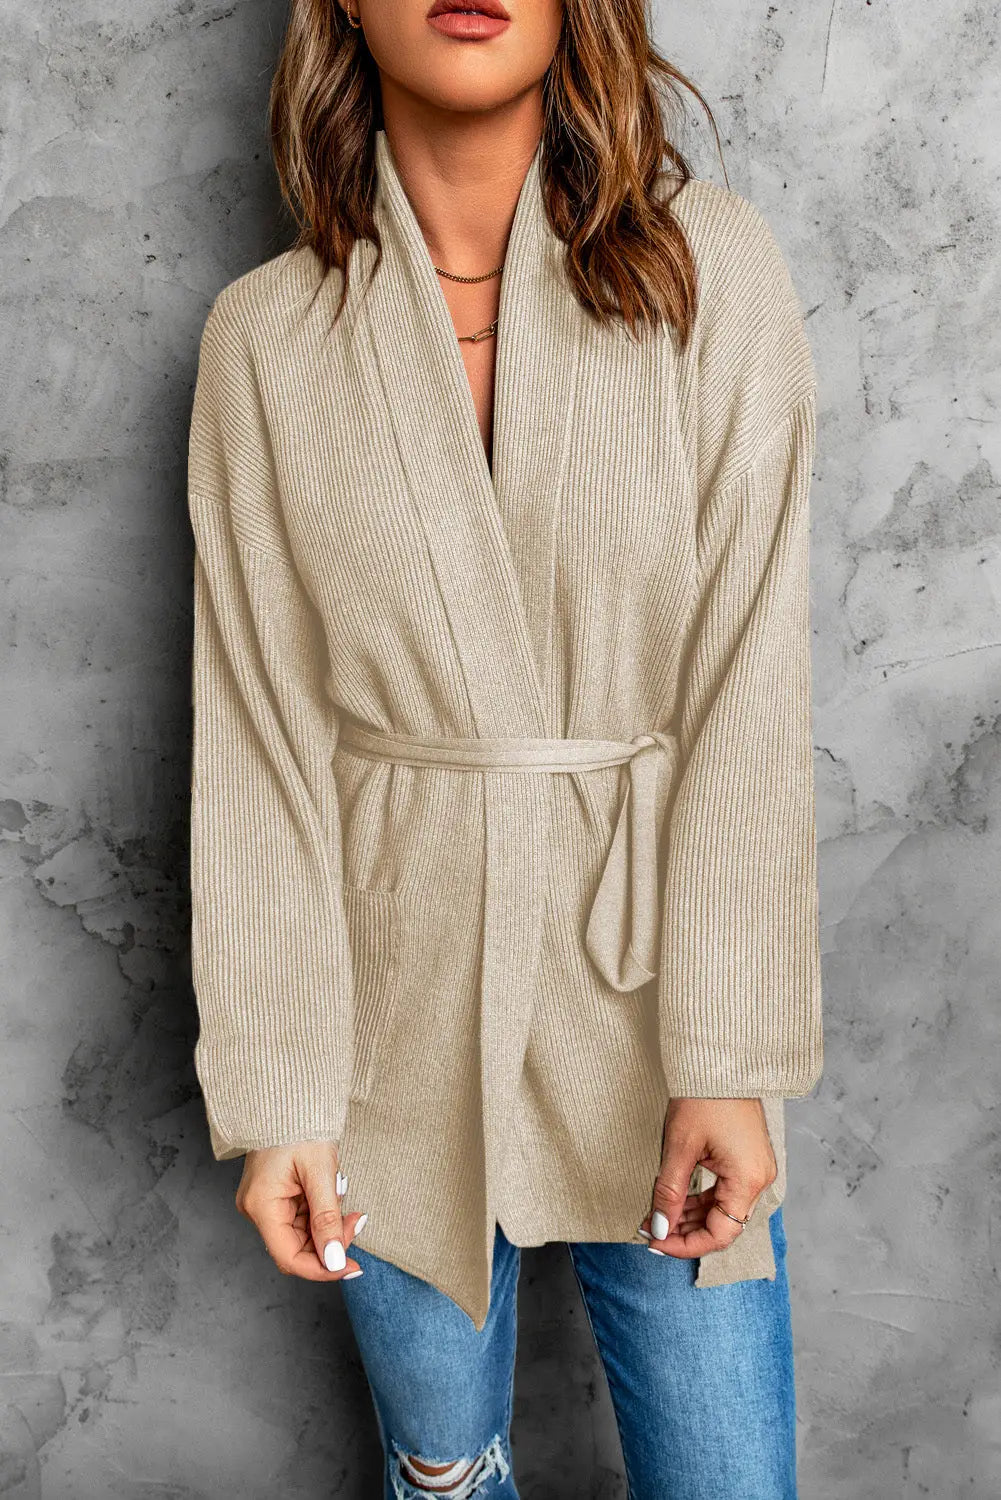 Black robe style rib knit pocketed cardigan with belt - sweaters & cardigans